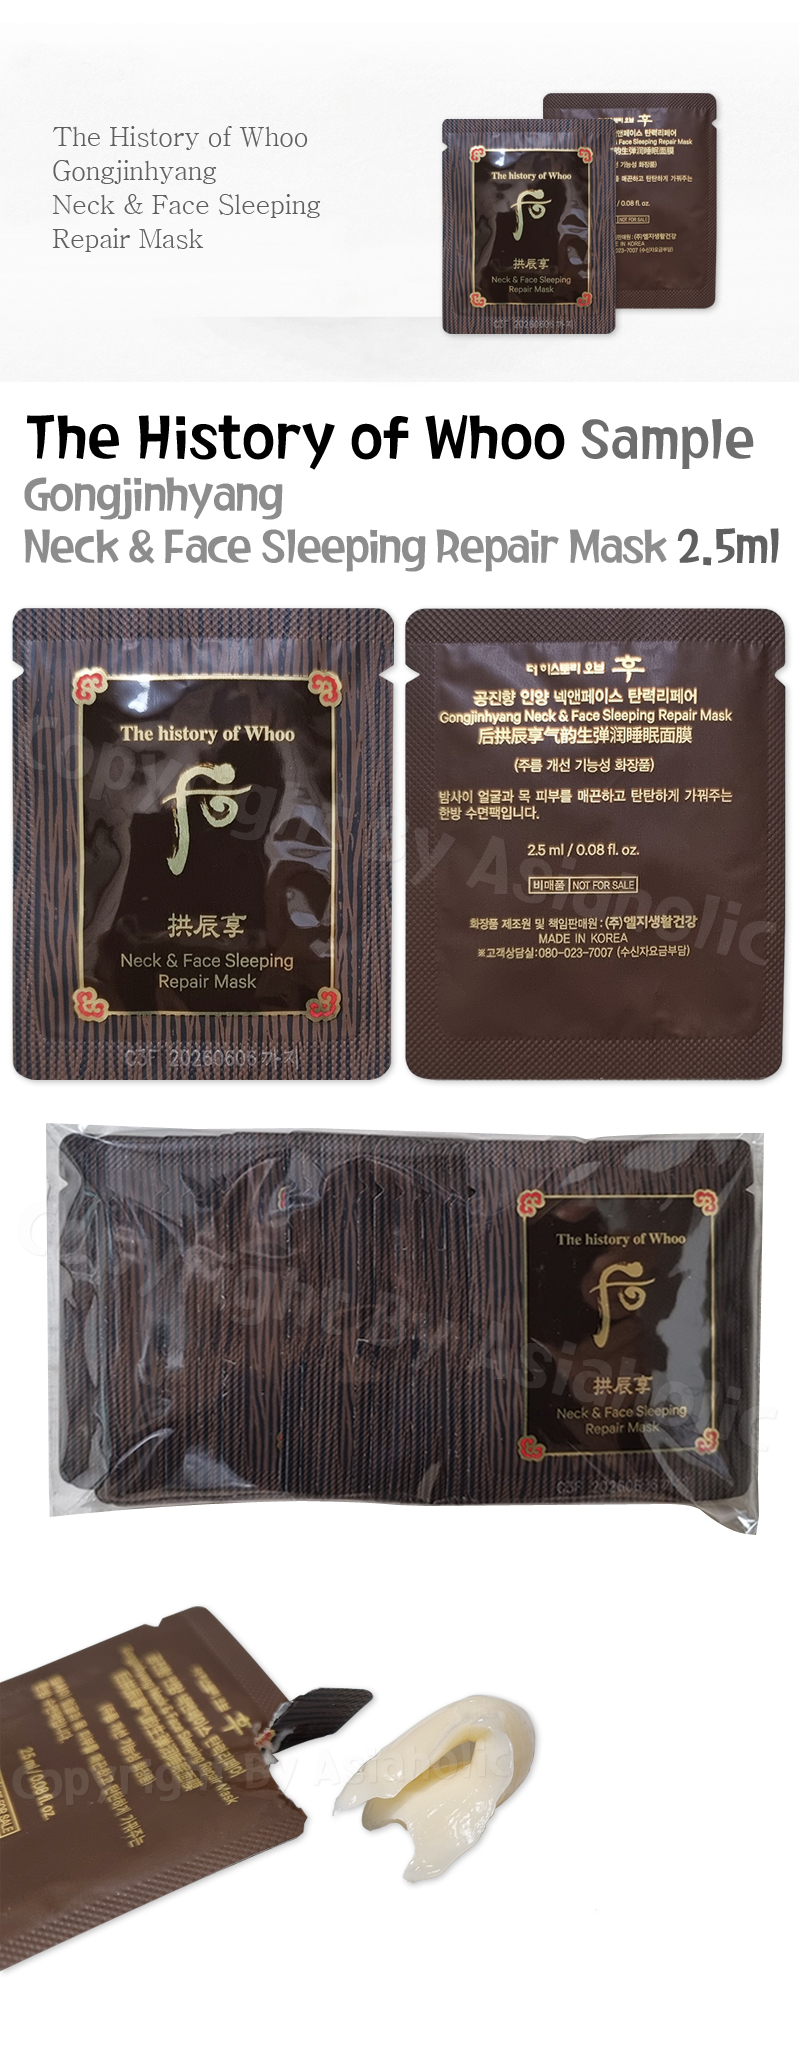 The history of Whoo Neck & Face Sleeping Repair Mask 2.5ml (10pcs ~ 100pcs) Sample Newest Version